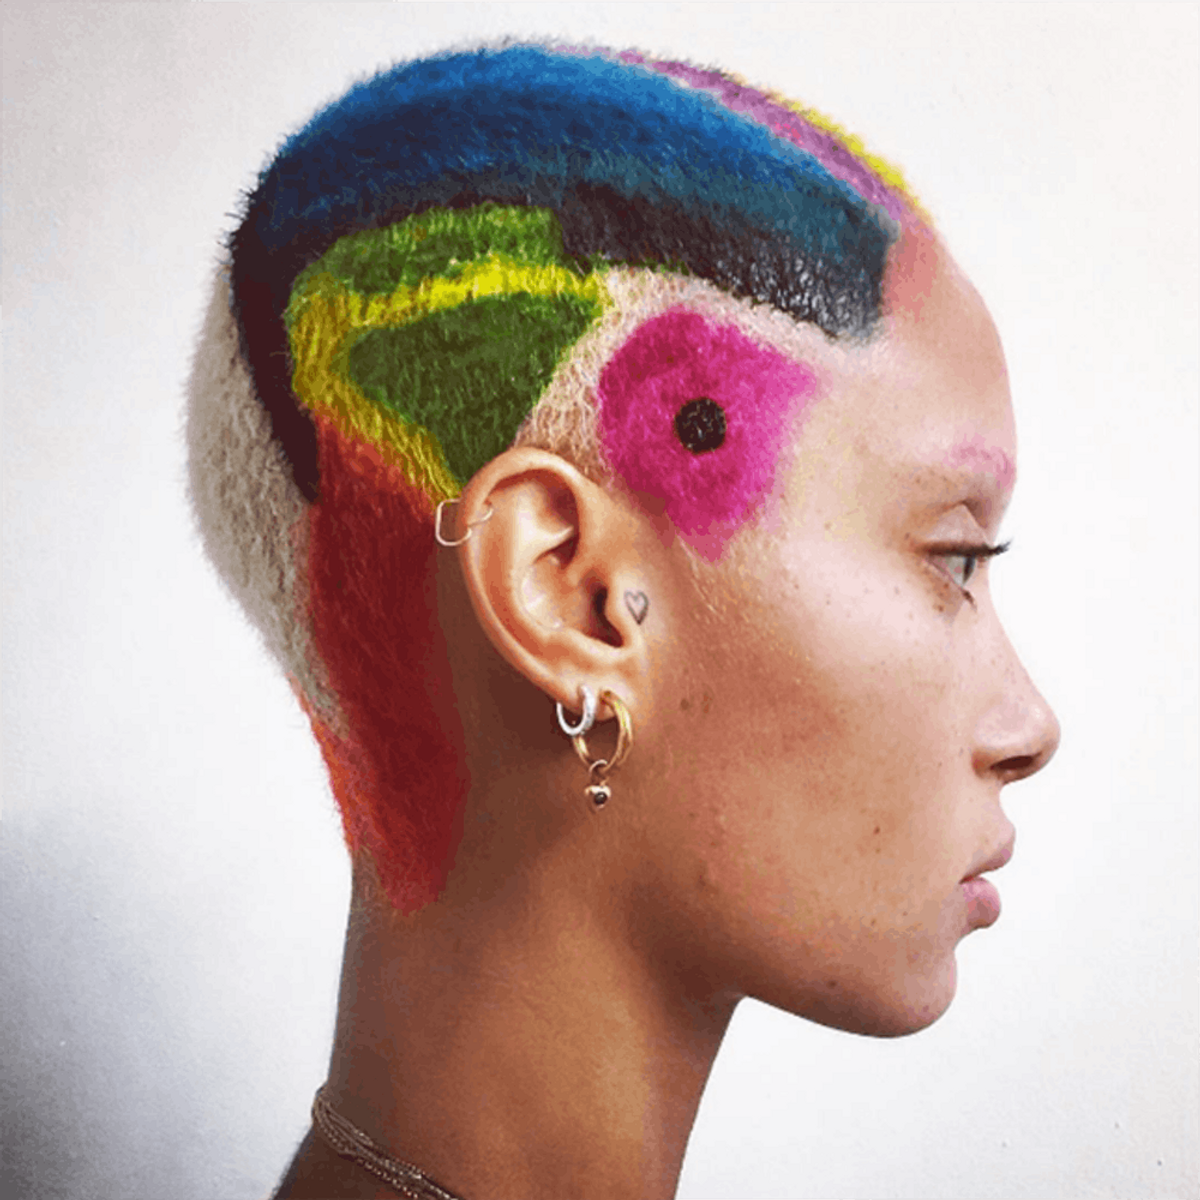 How to Wear the Graffiti Hair Trend for Summer Concerts